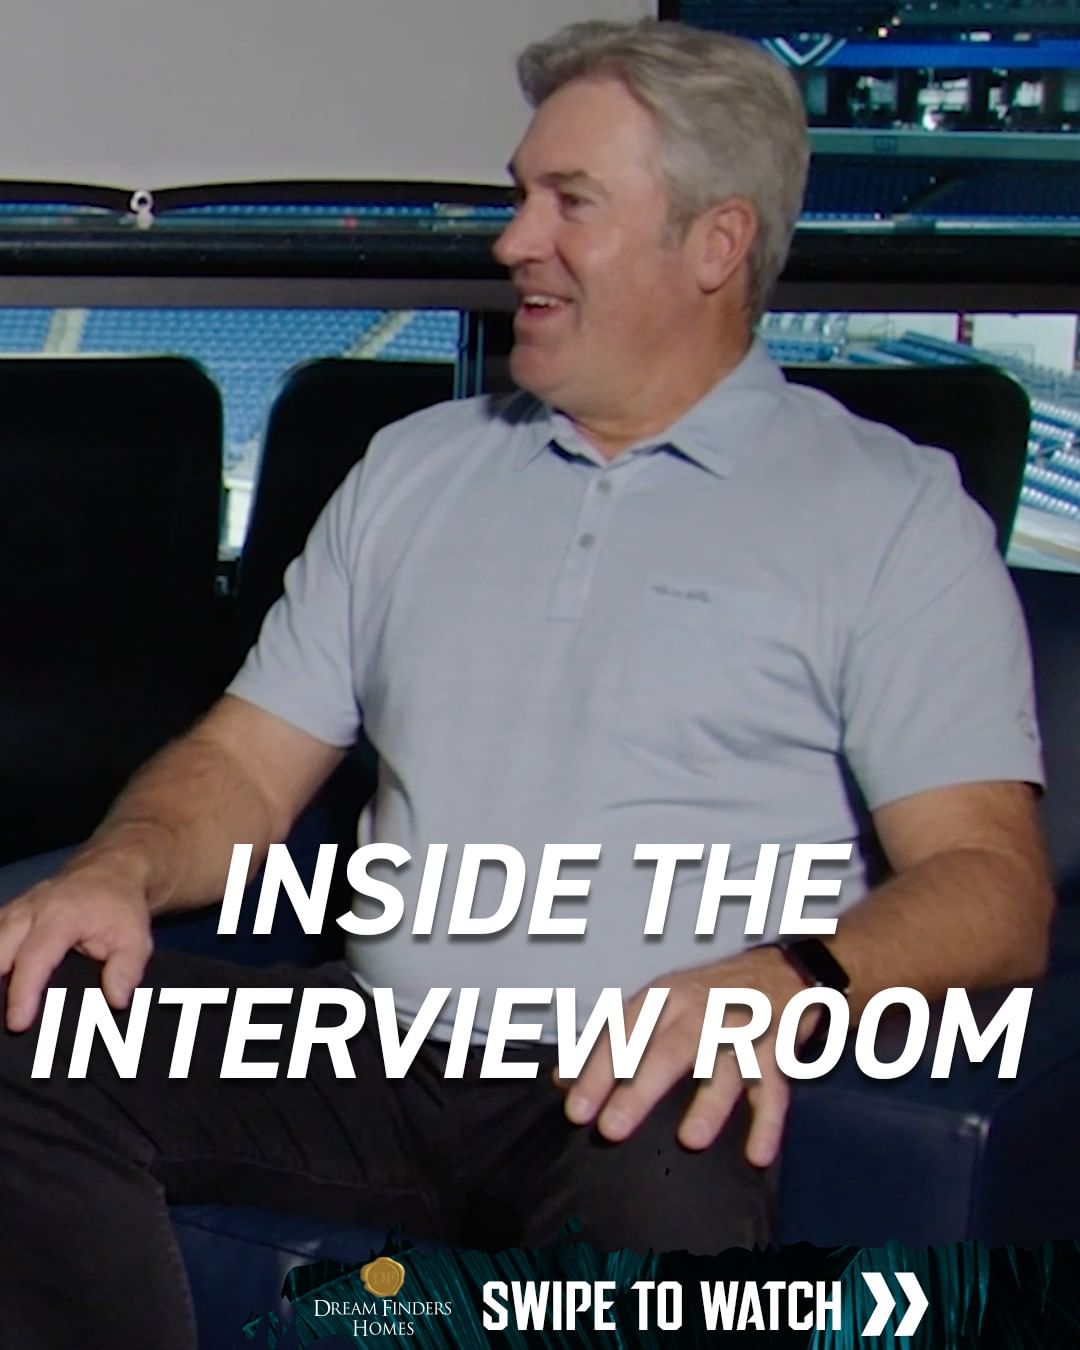 Go inside the Interview Room with Coach Pederson and @ashlynrsullivan for an exc...